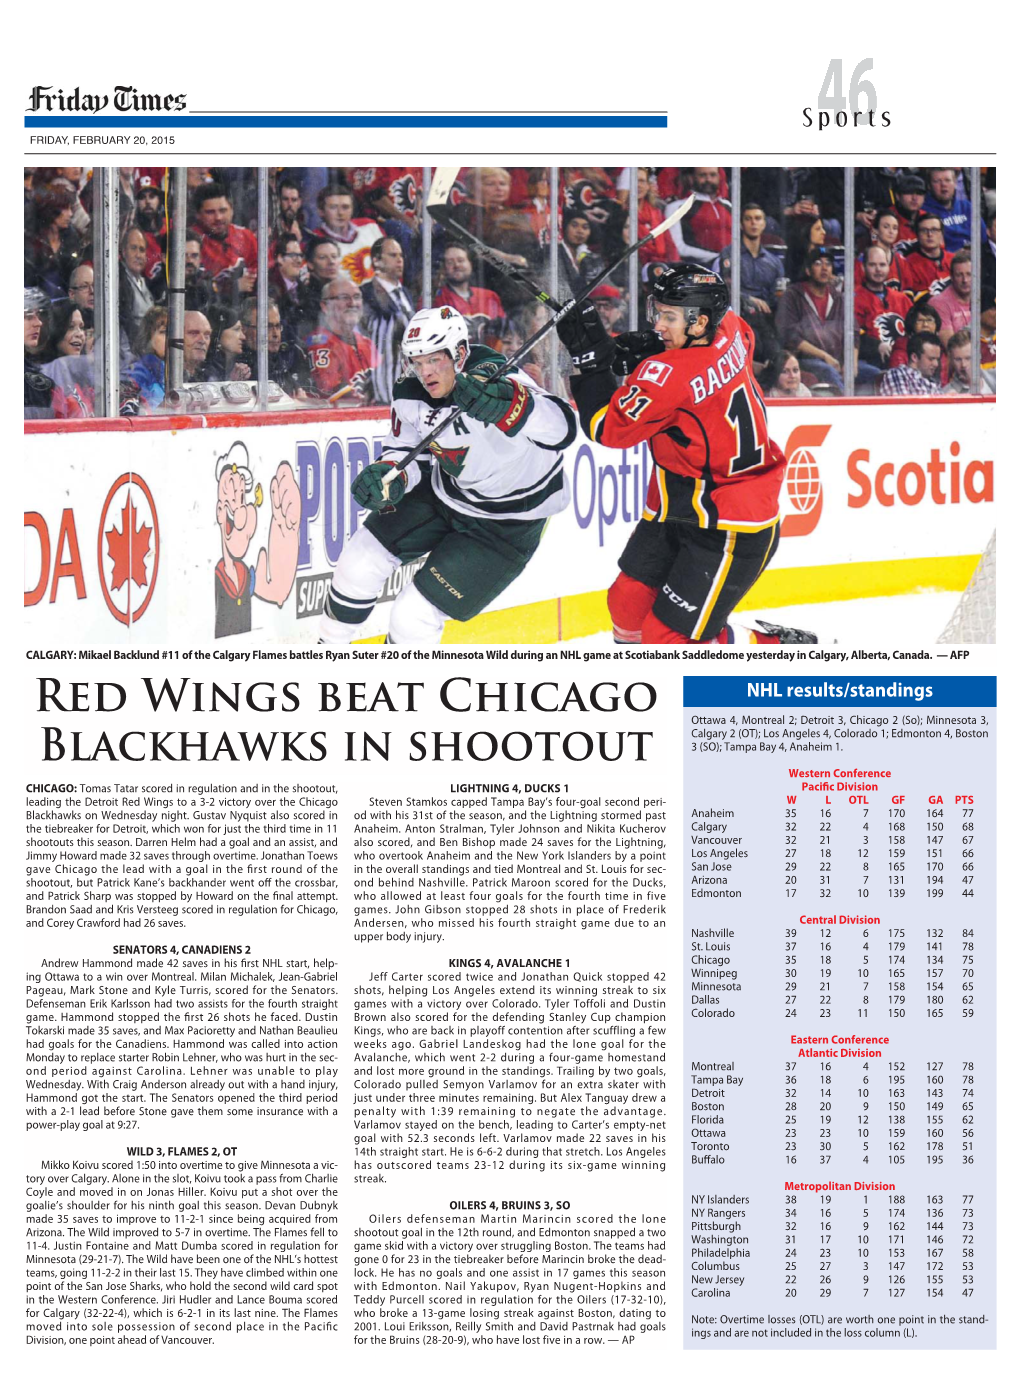 Red Wings Beat Chicago Blackhawks in Shootout